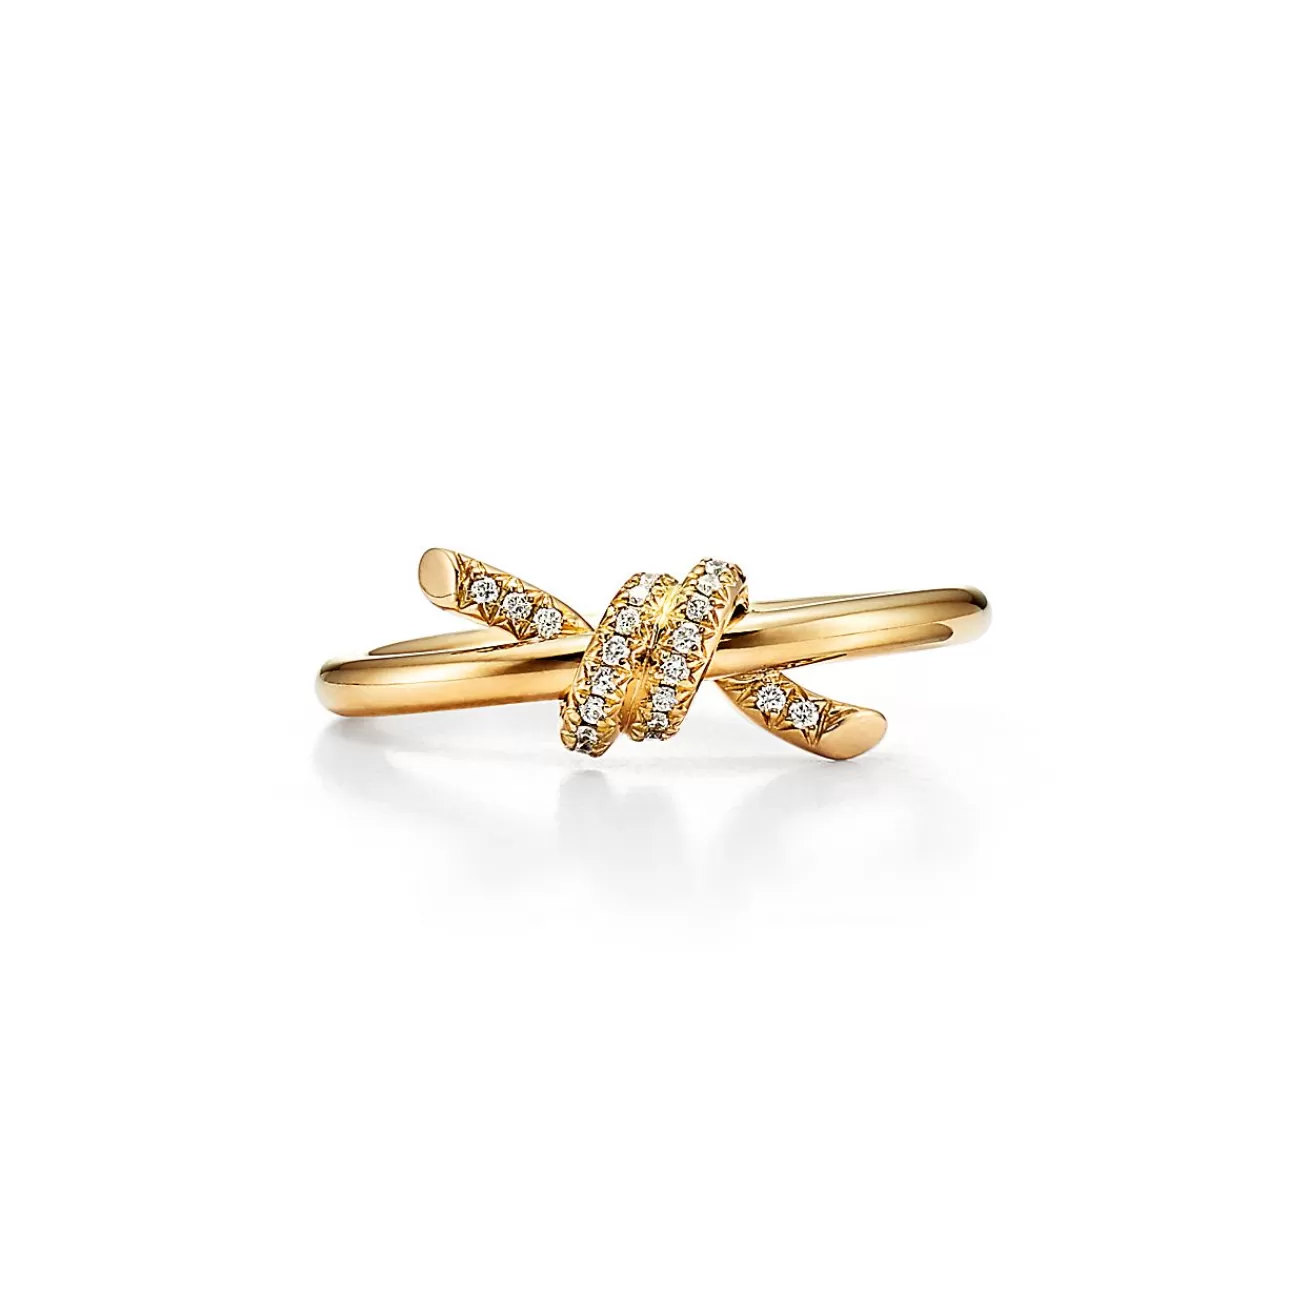 Tiffany & Co. Tiffany Knot Ring in Yellow Gold with Diamonds | ^ Rings | Gifts for Her